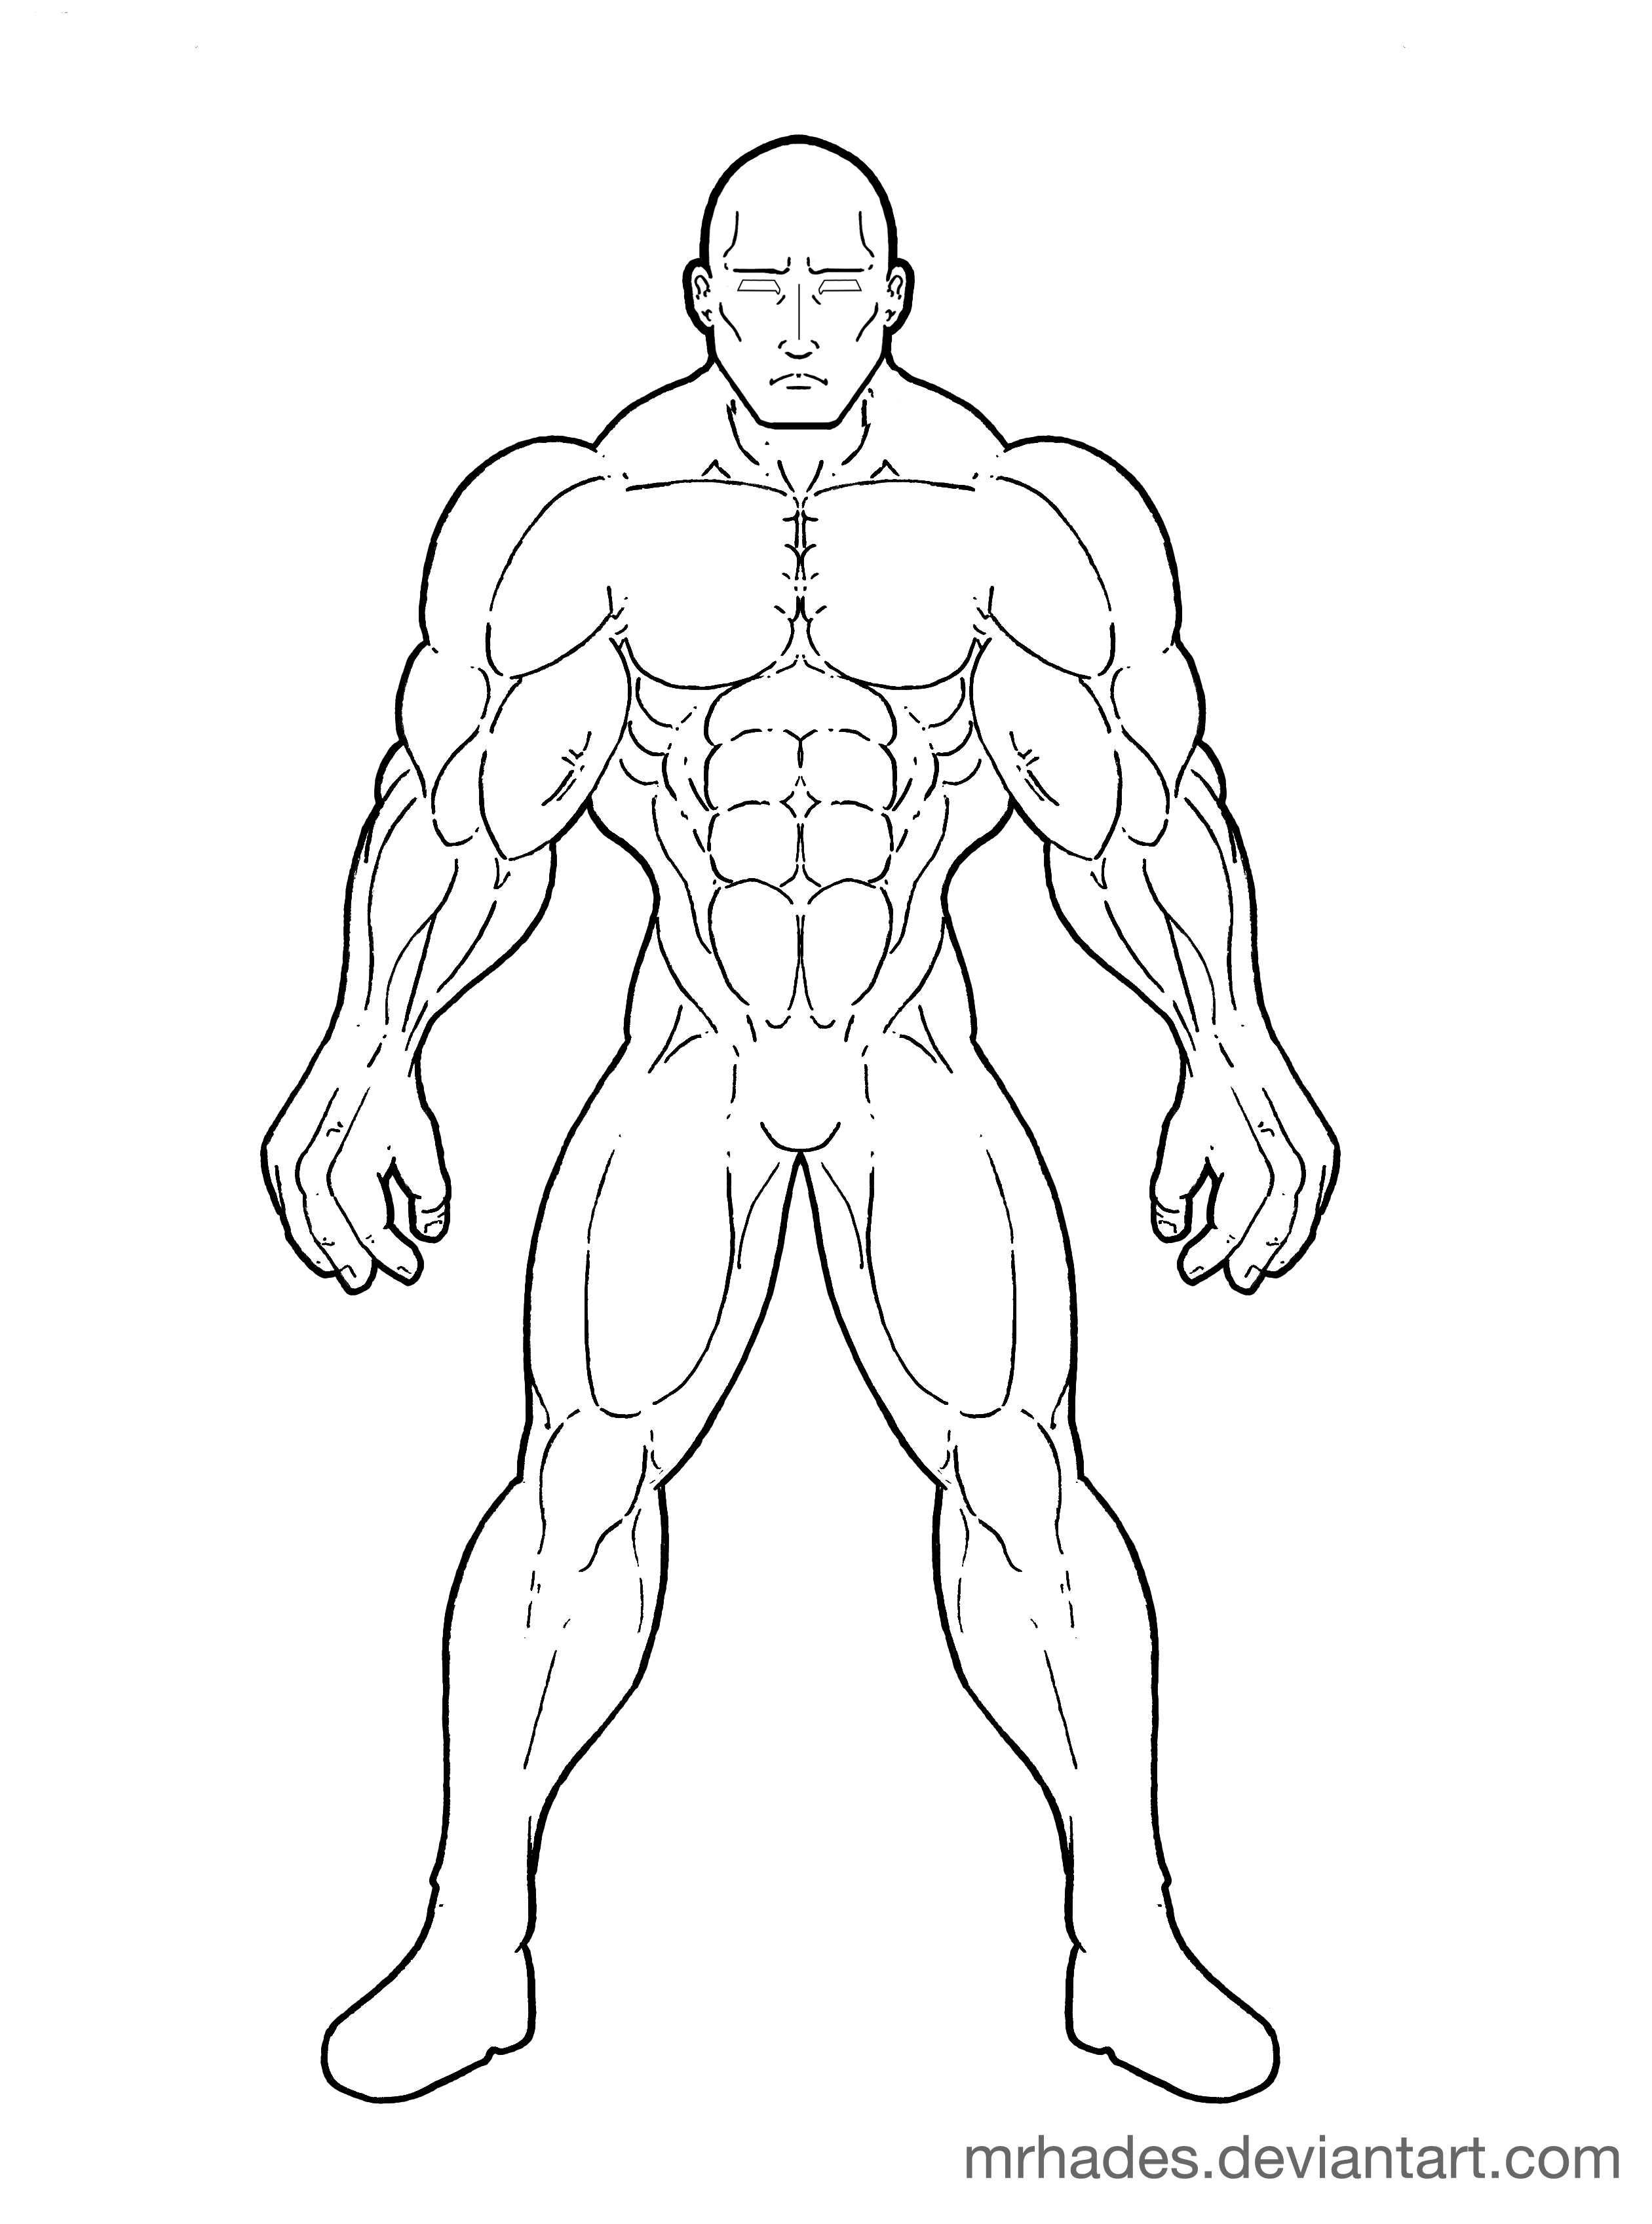 Create Your Own Superhero Coloring Page 28 best LS Ideas images on